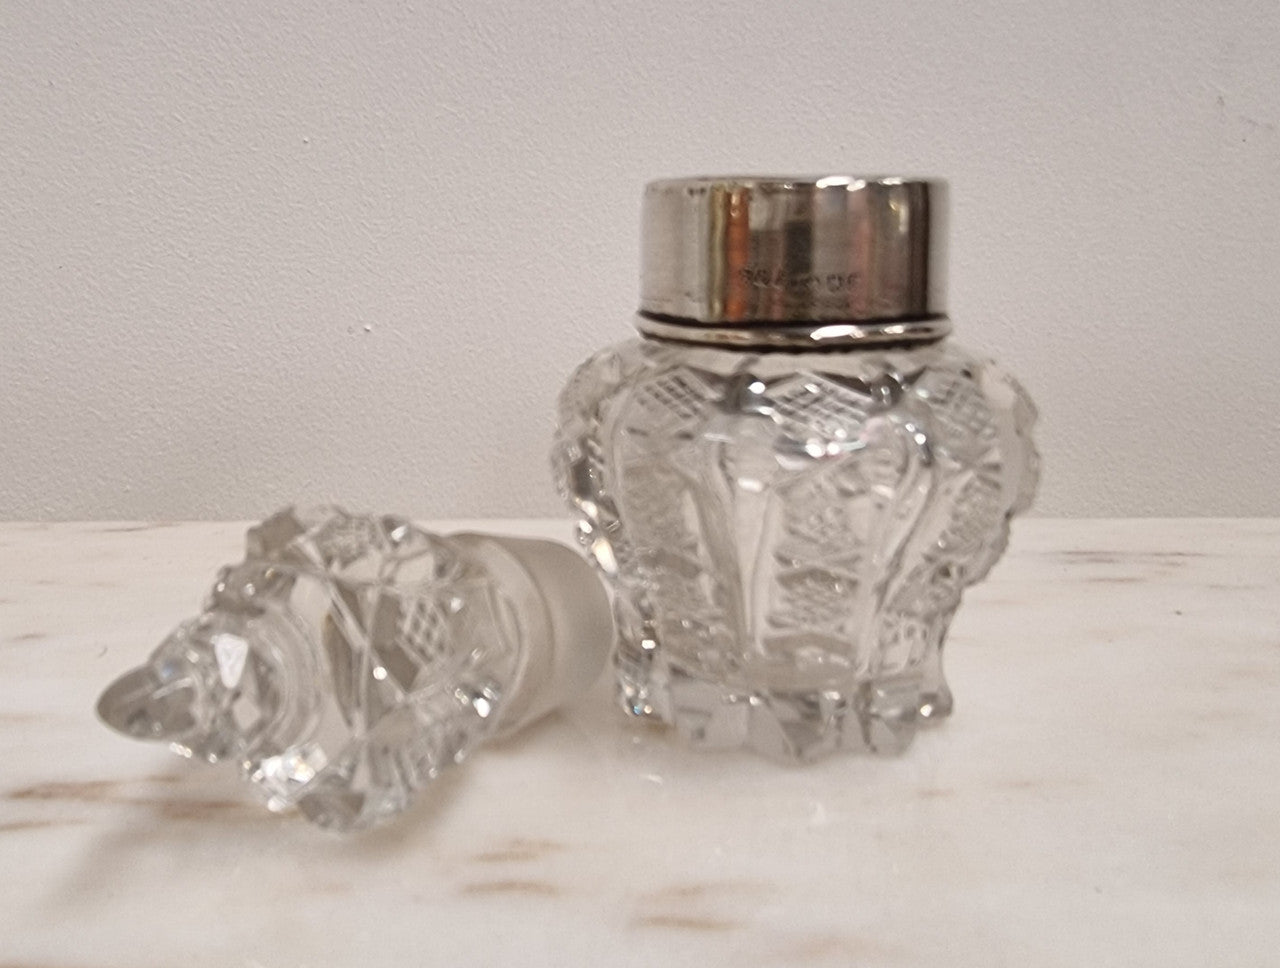 Decorative Hallmarked Silver Top Cut Crystal Scent Bottle